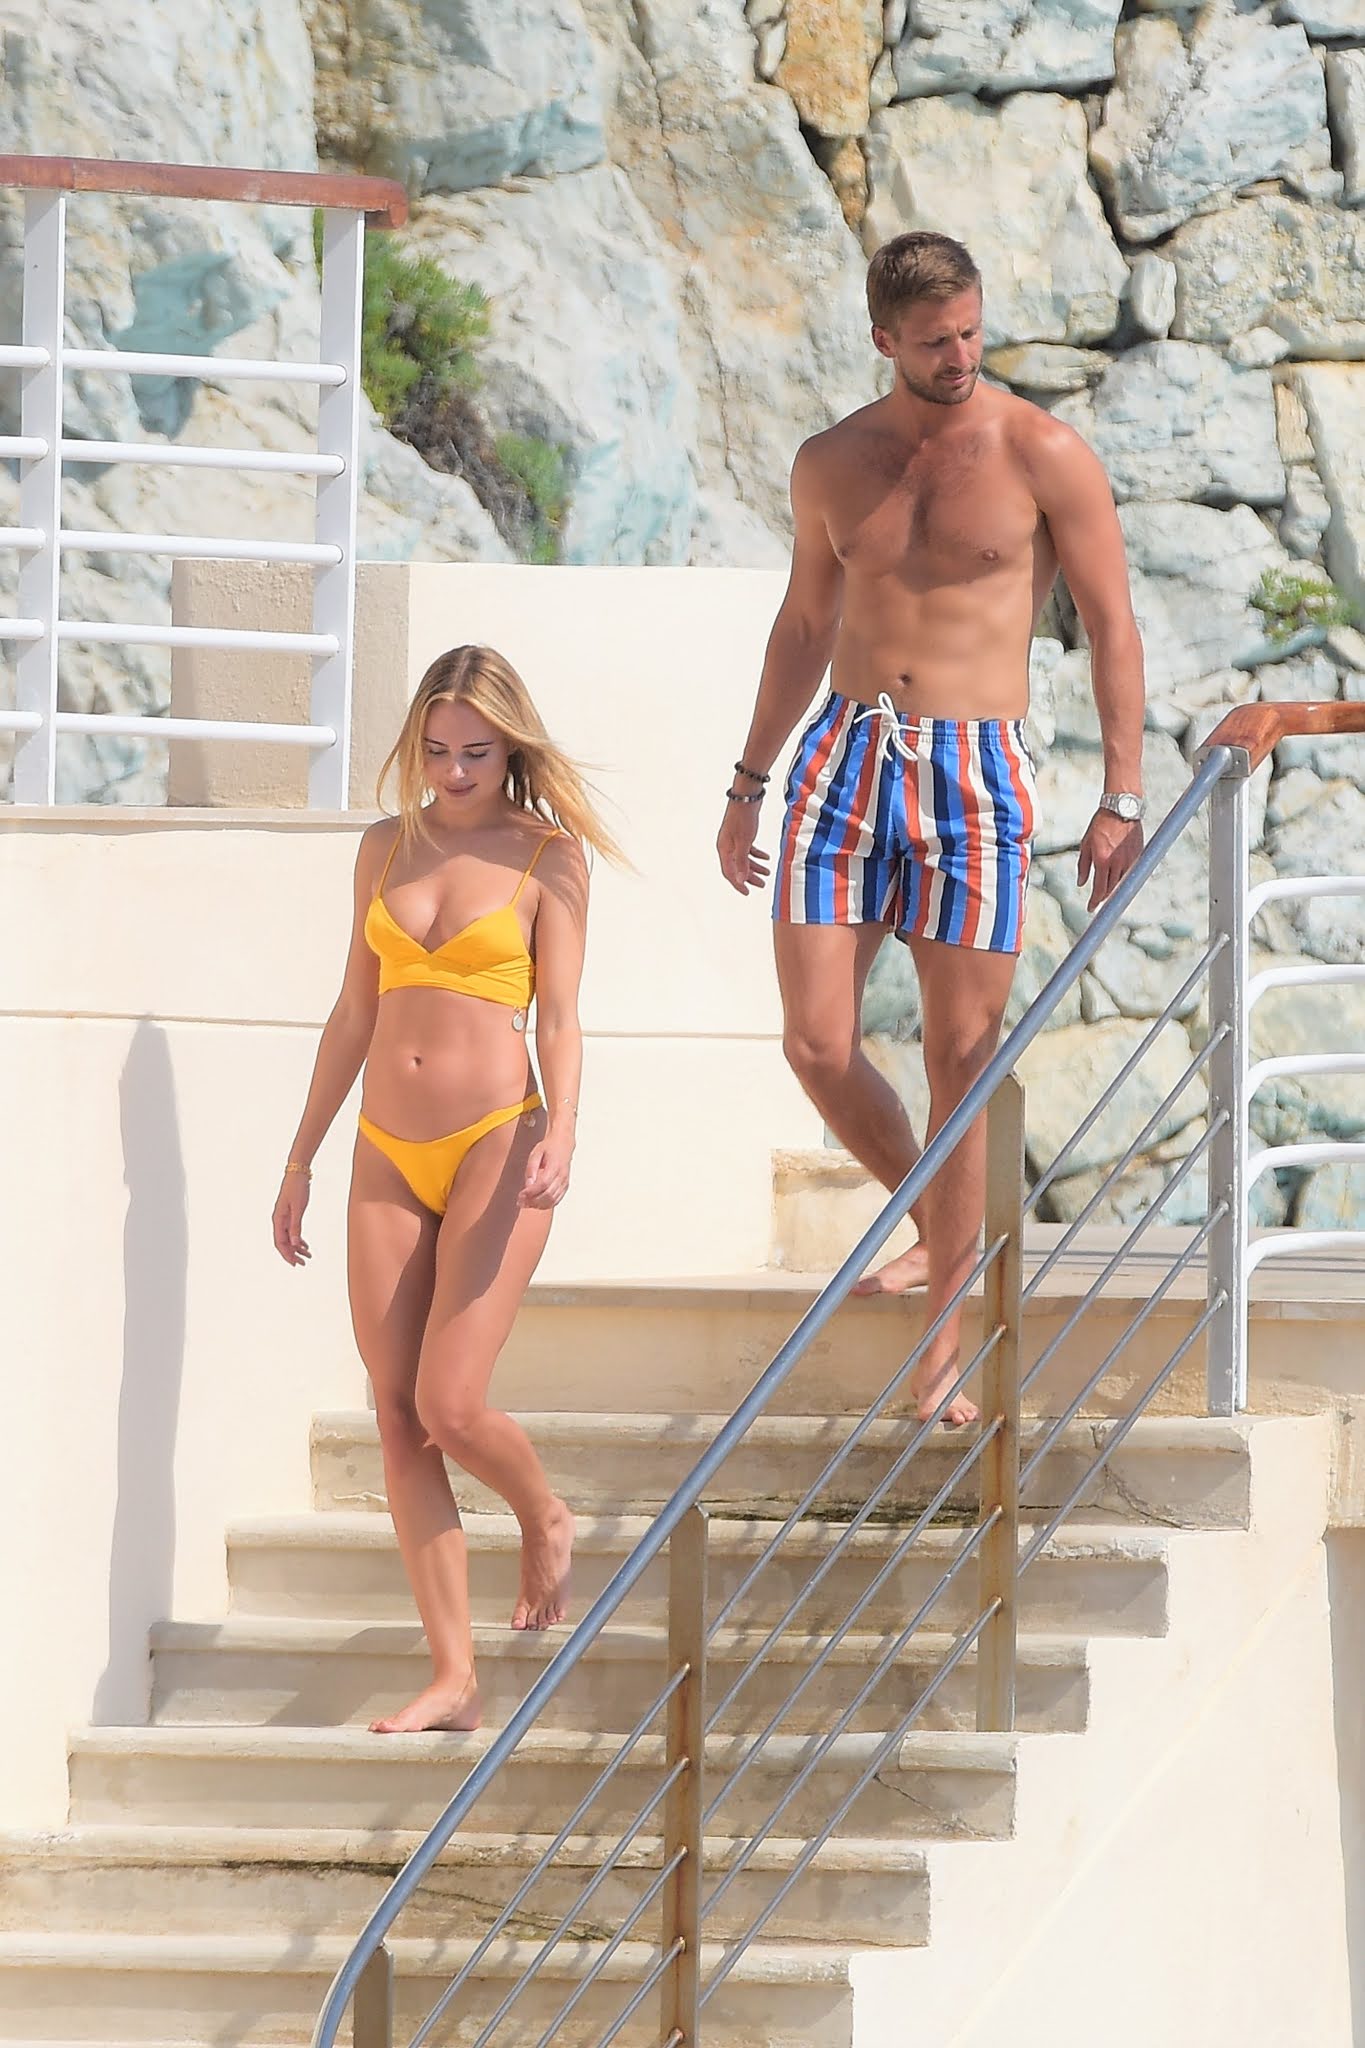 Kimberley Garner shows off her jaw-dropping figure in a TINY yellow bikini during Cannes trip